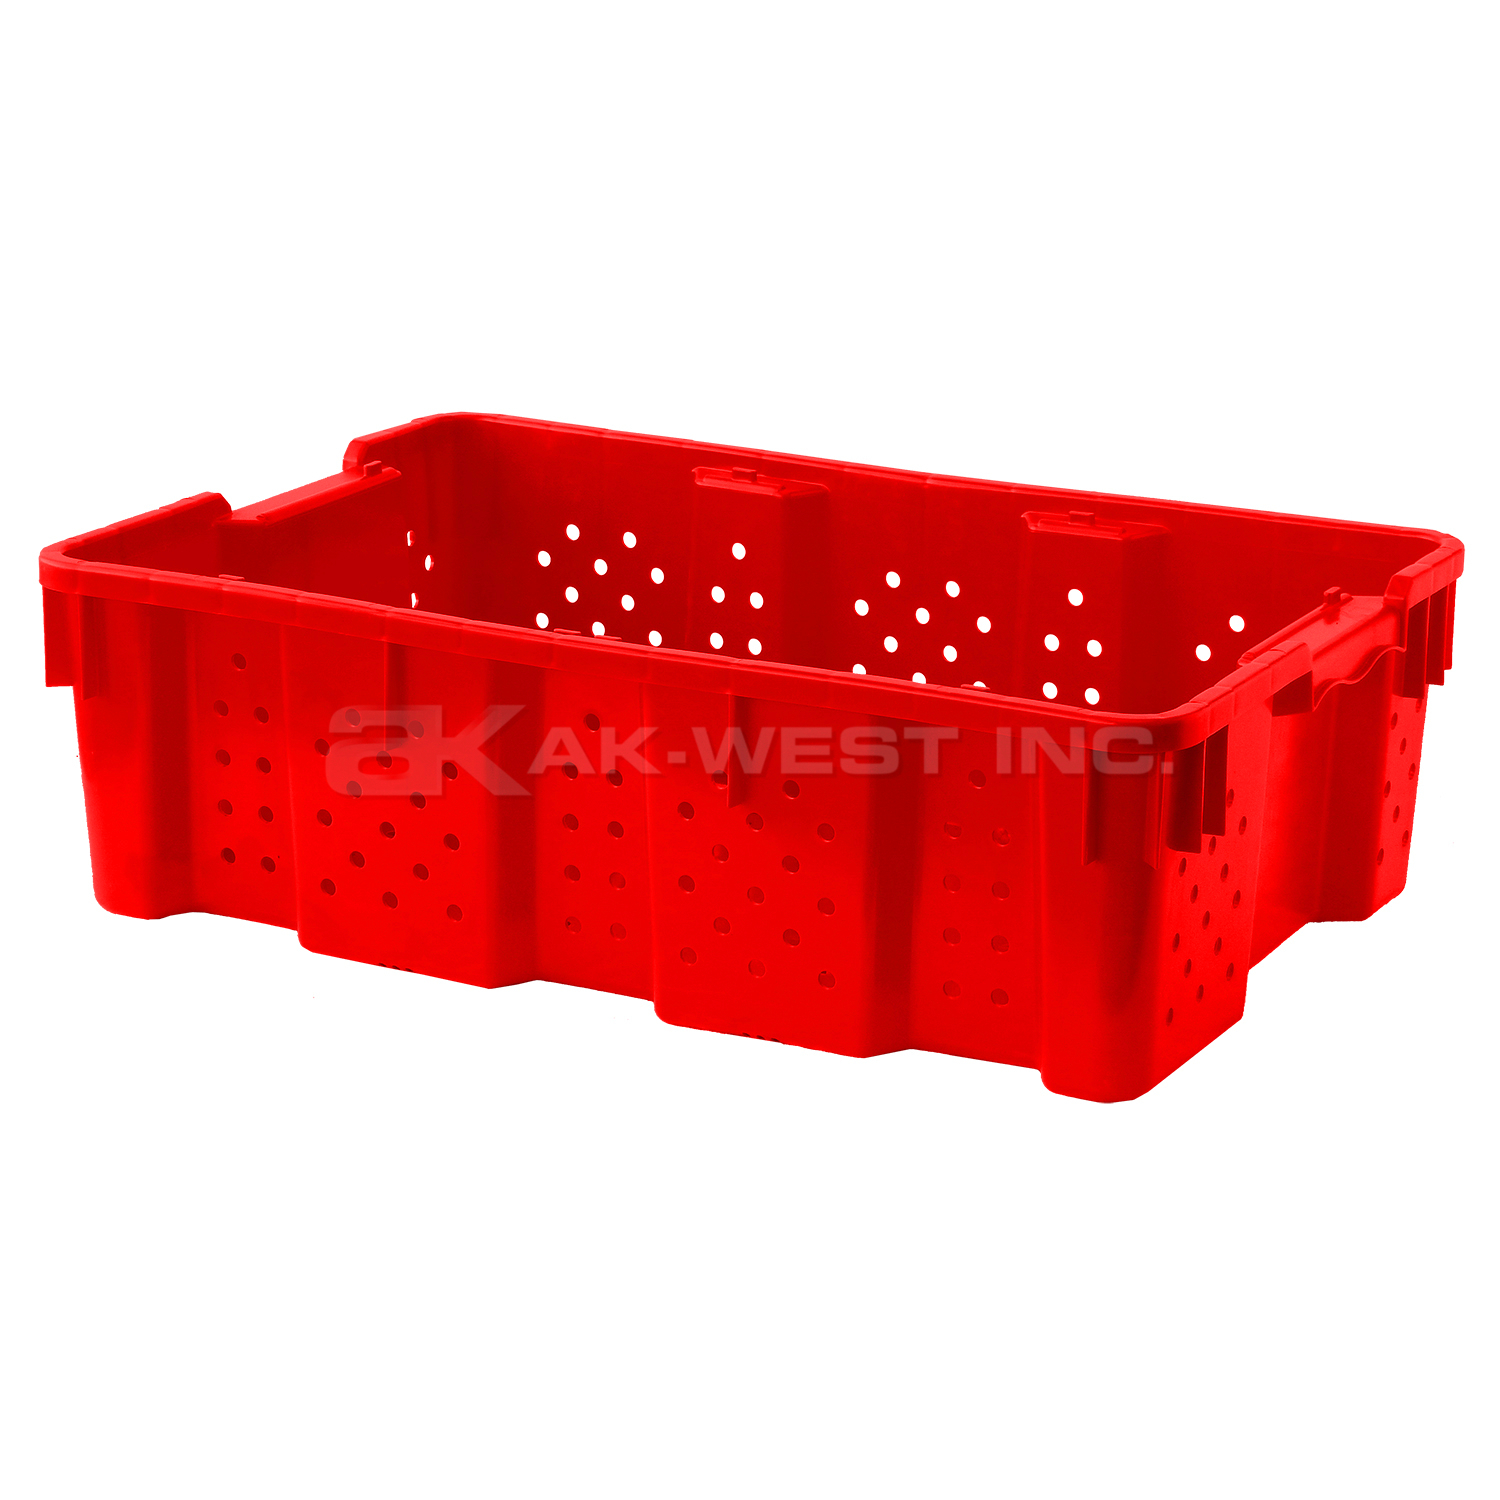 Red, 24"L x 16"W x 7"H Stack and Nest Container w/ Vented Sides and Base